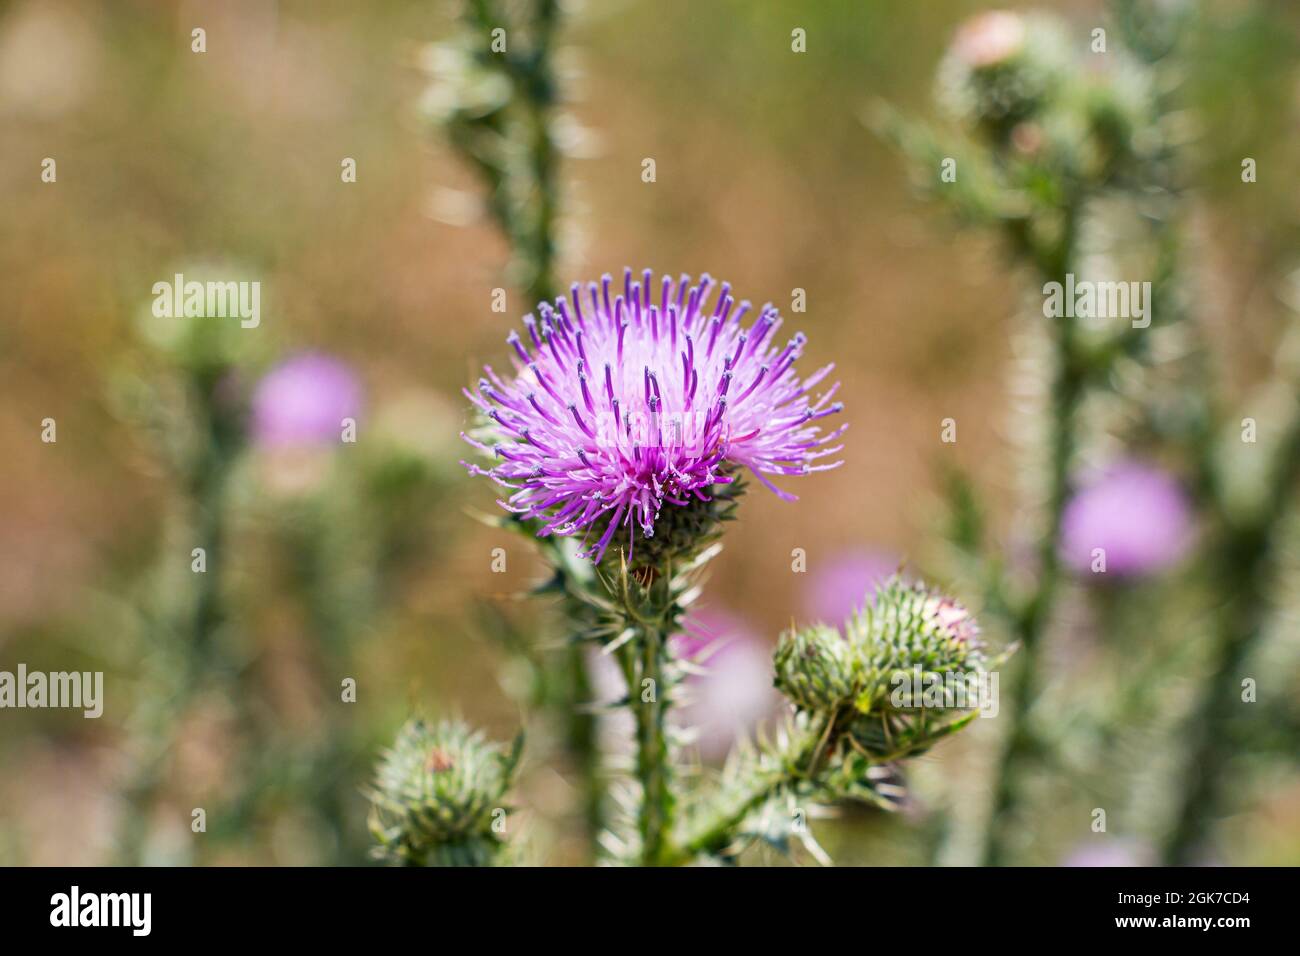 A blooming thistle with pink flowers, in a blooming field Stock Photo